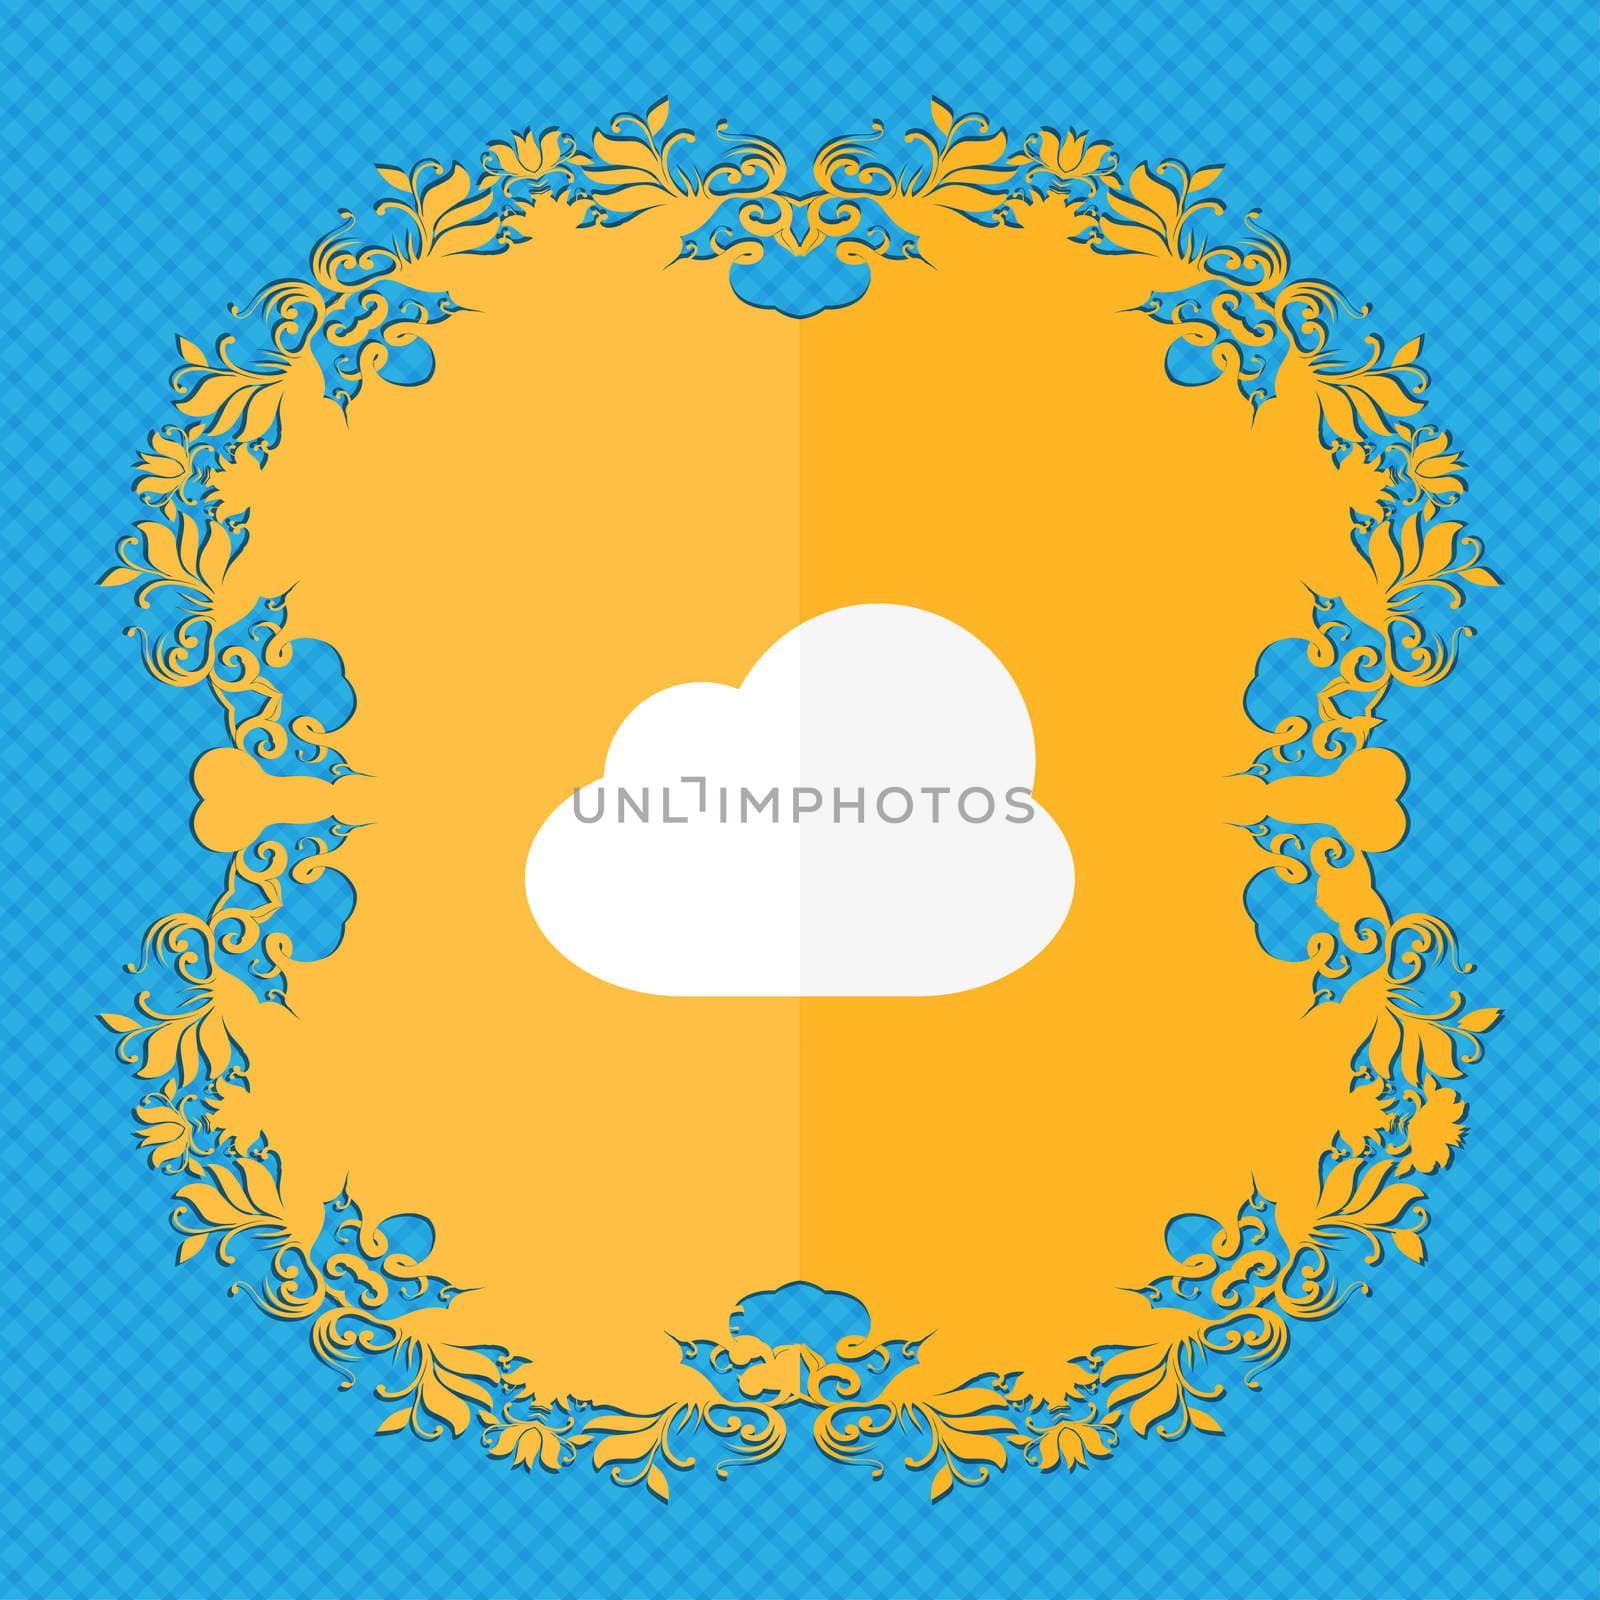 Cloud . Floral flat design on a blue abstract background with place for your text. illustration